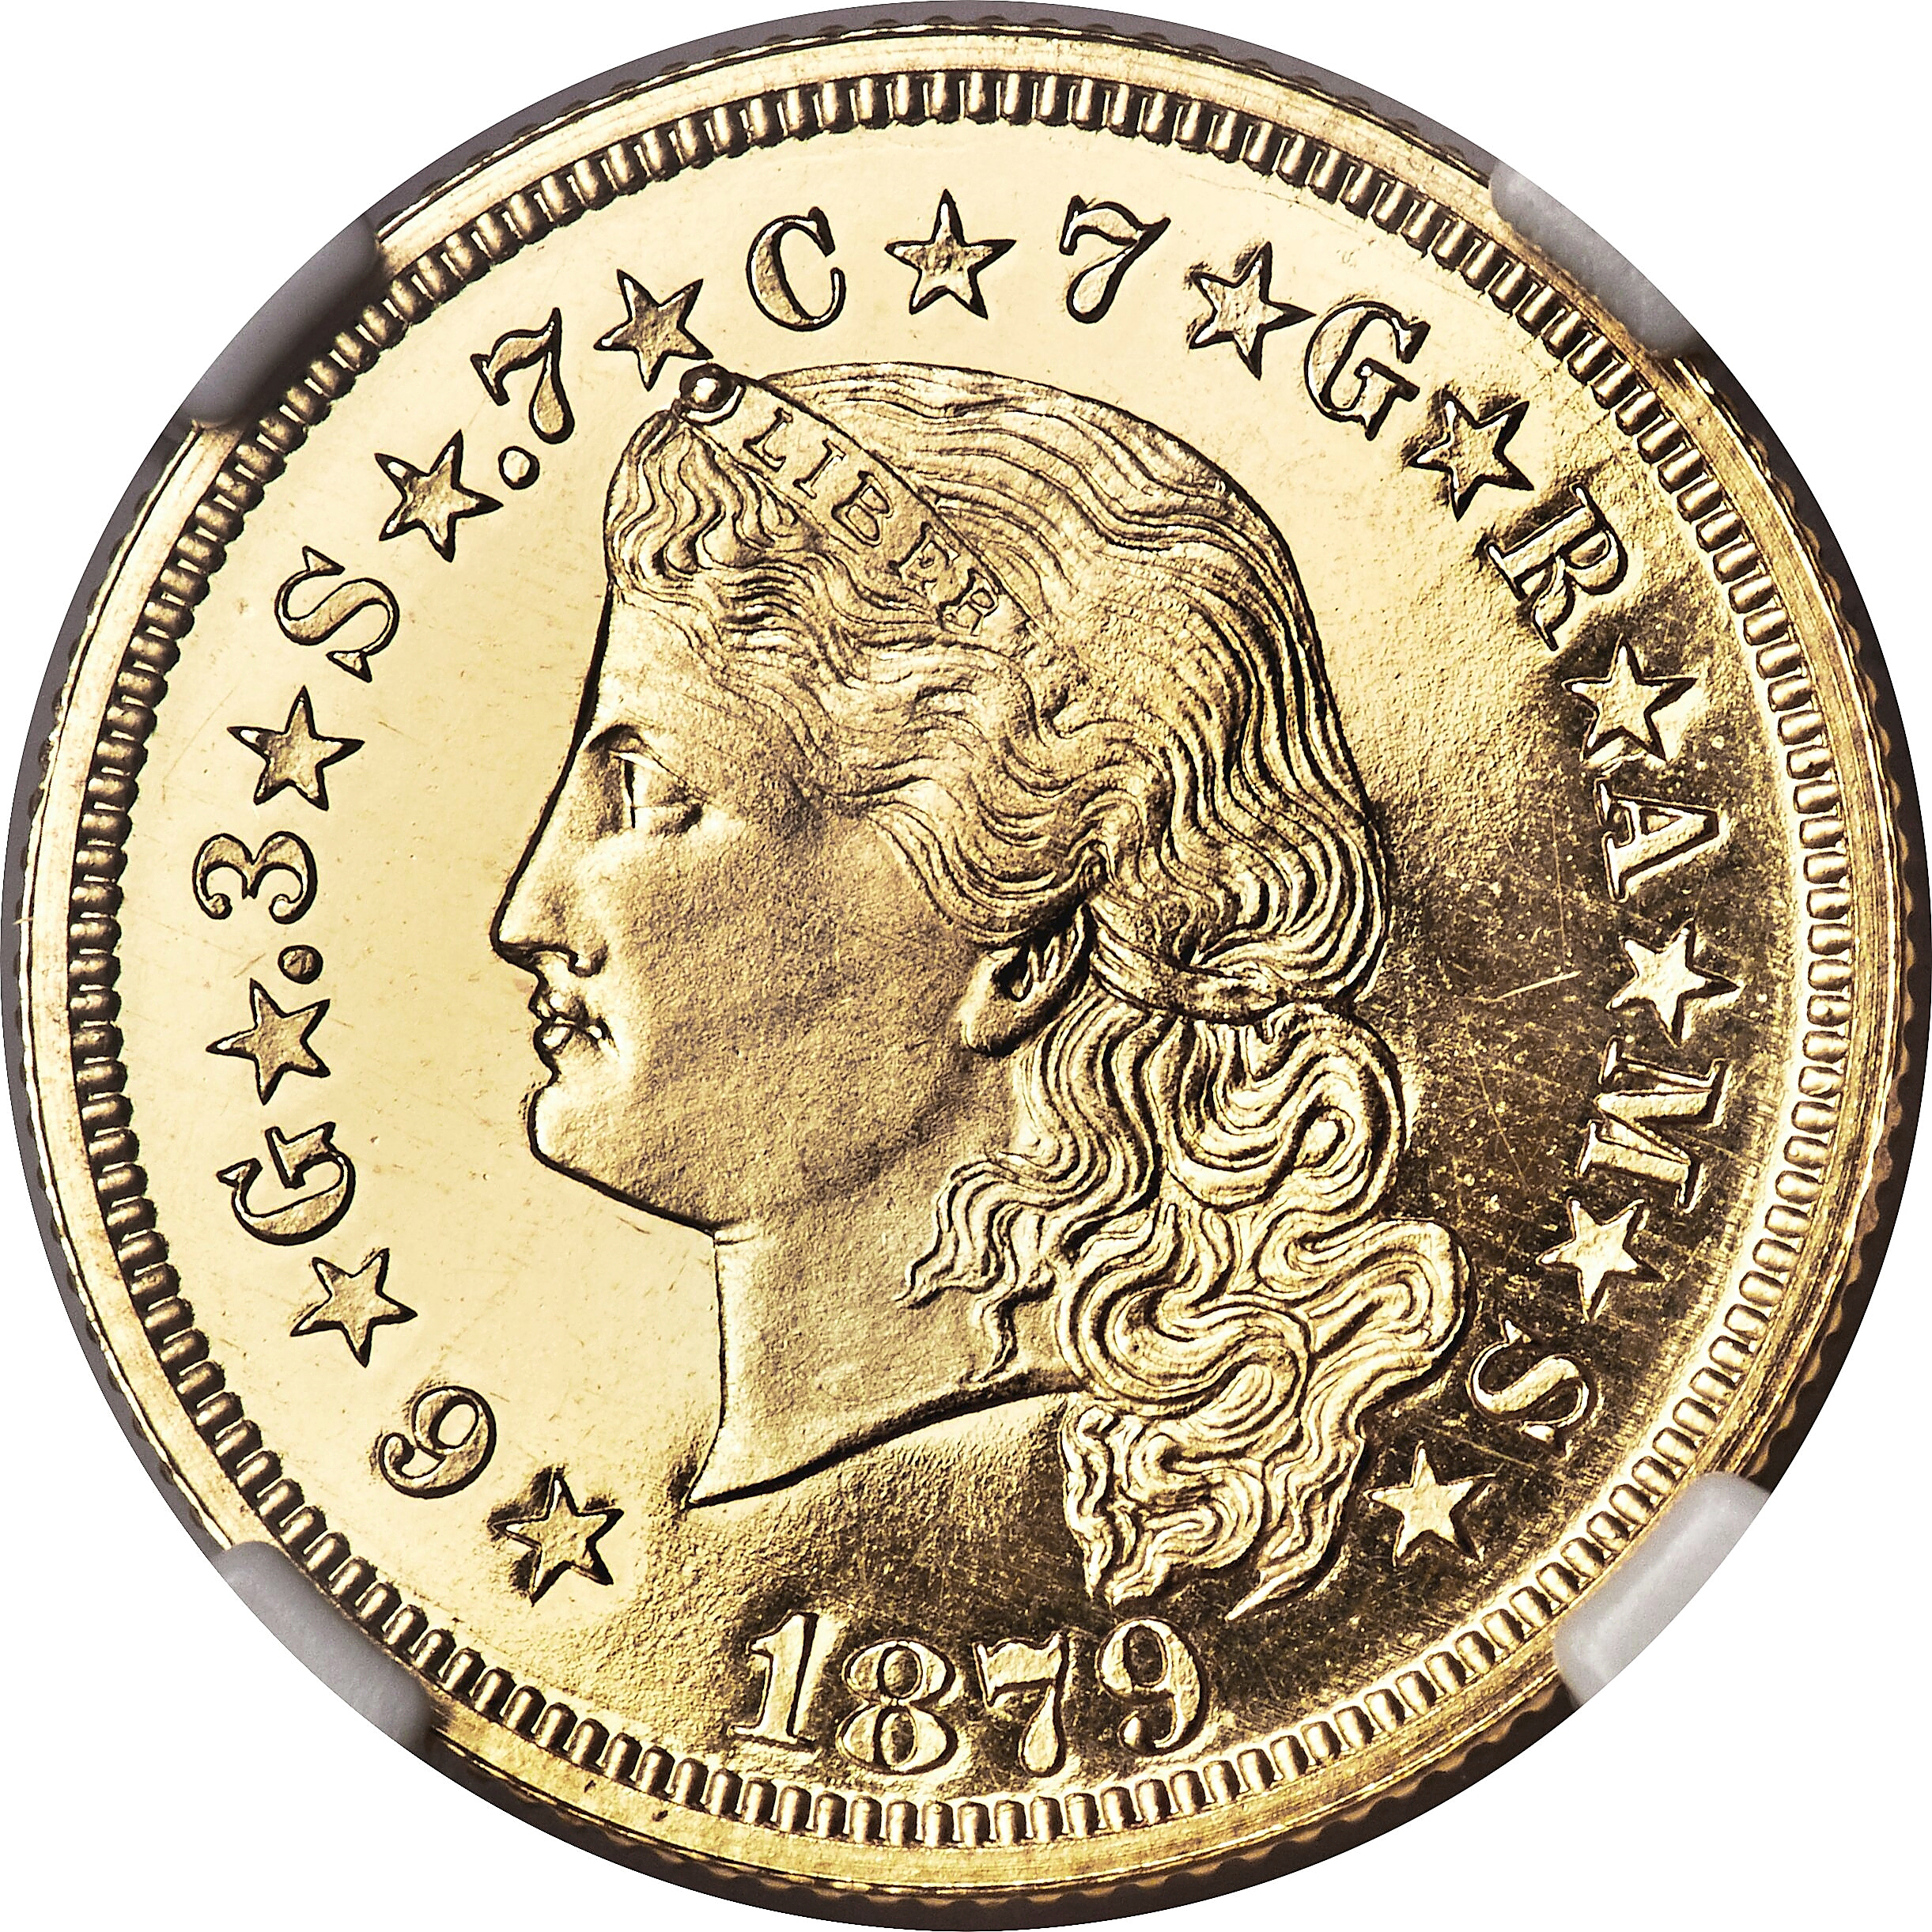 1879 Flowing Hair $4 Gold Coin Leads Heritage Auctions' US Coins